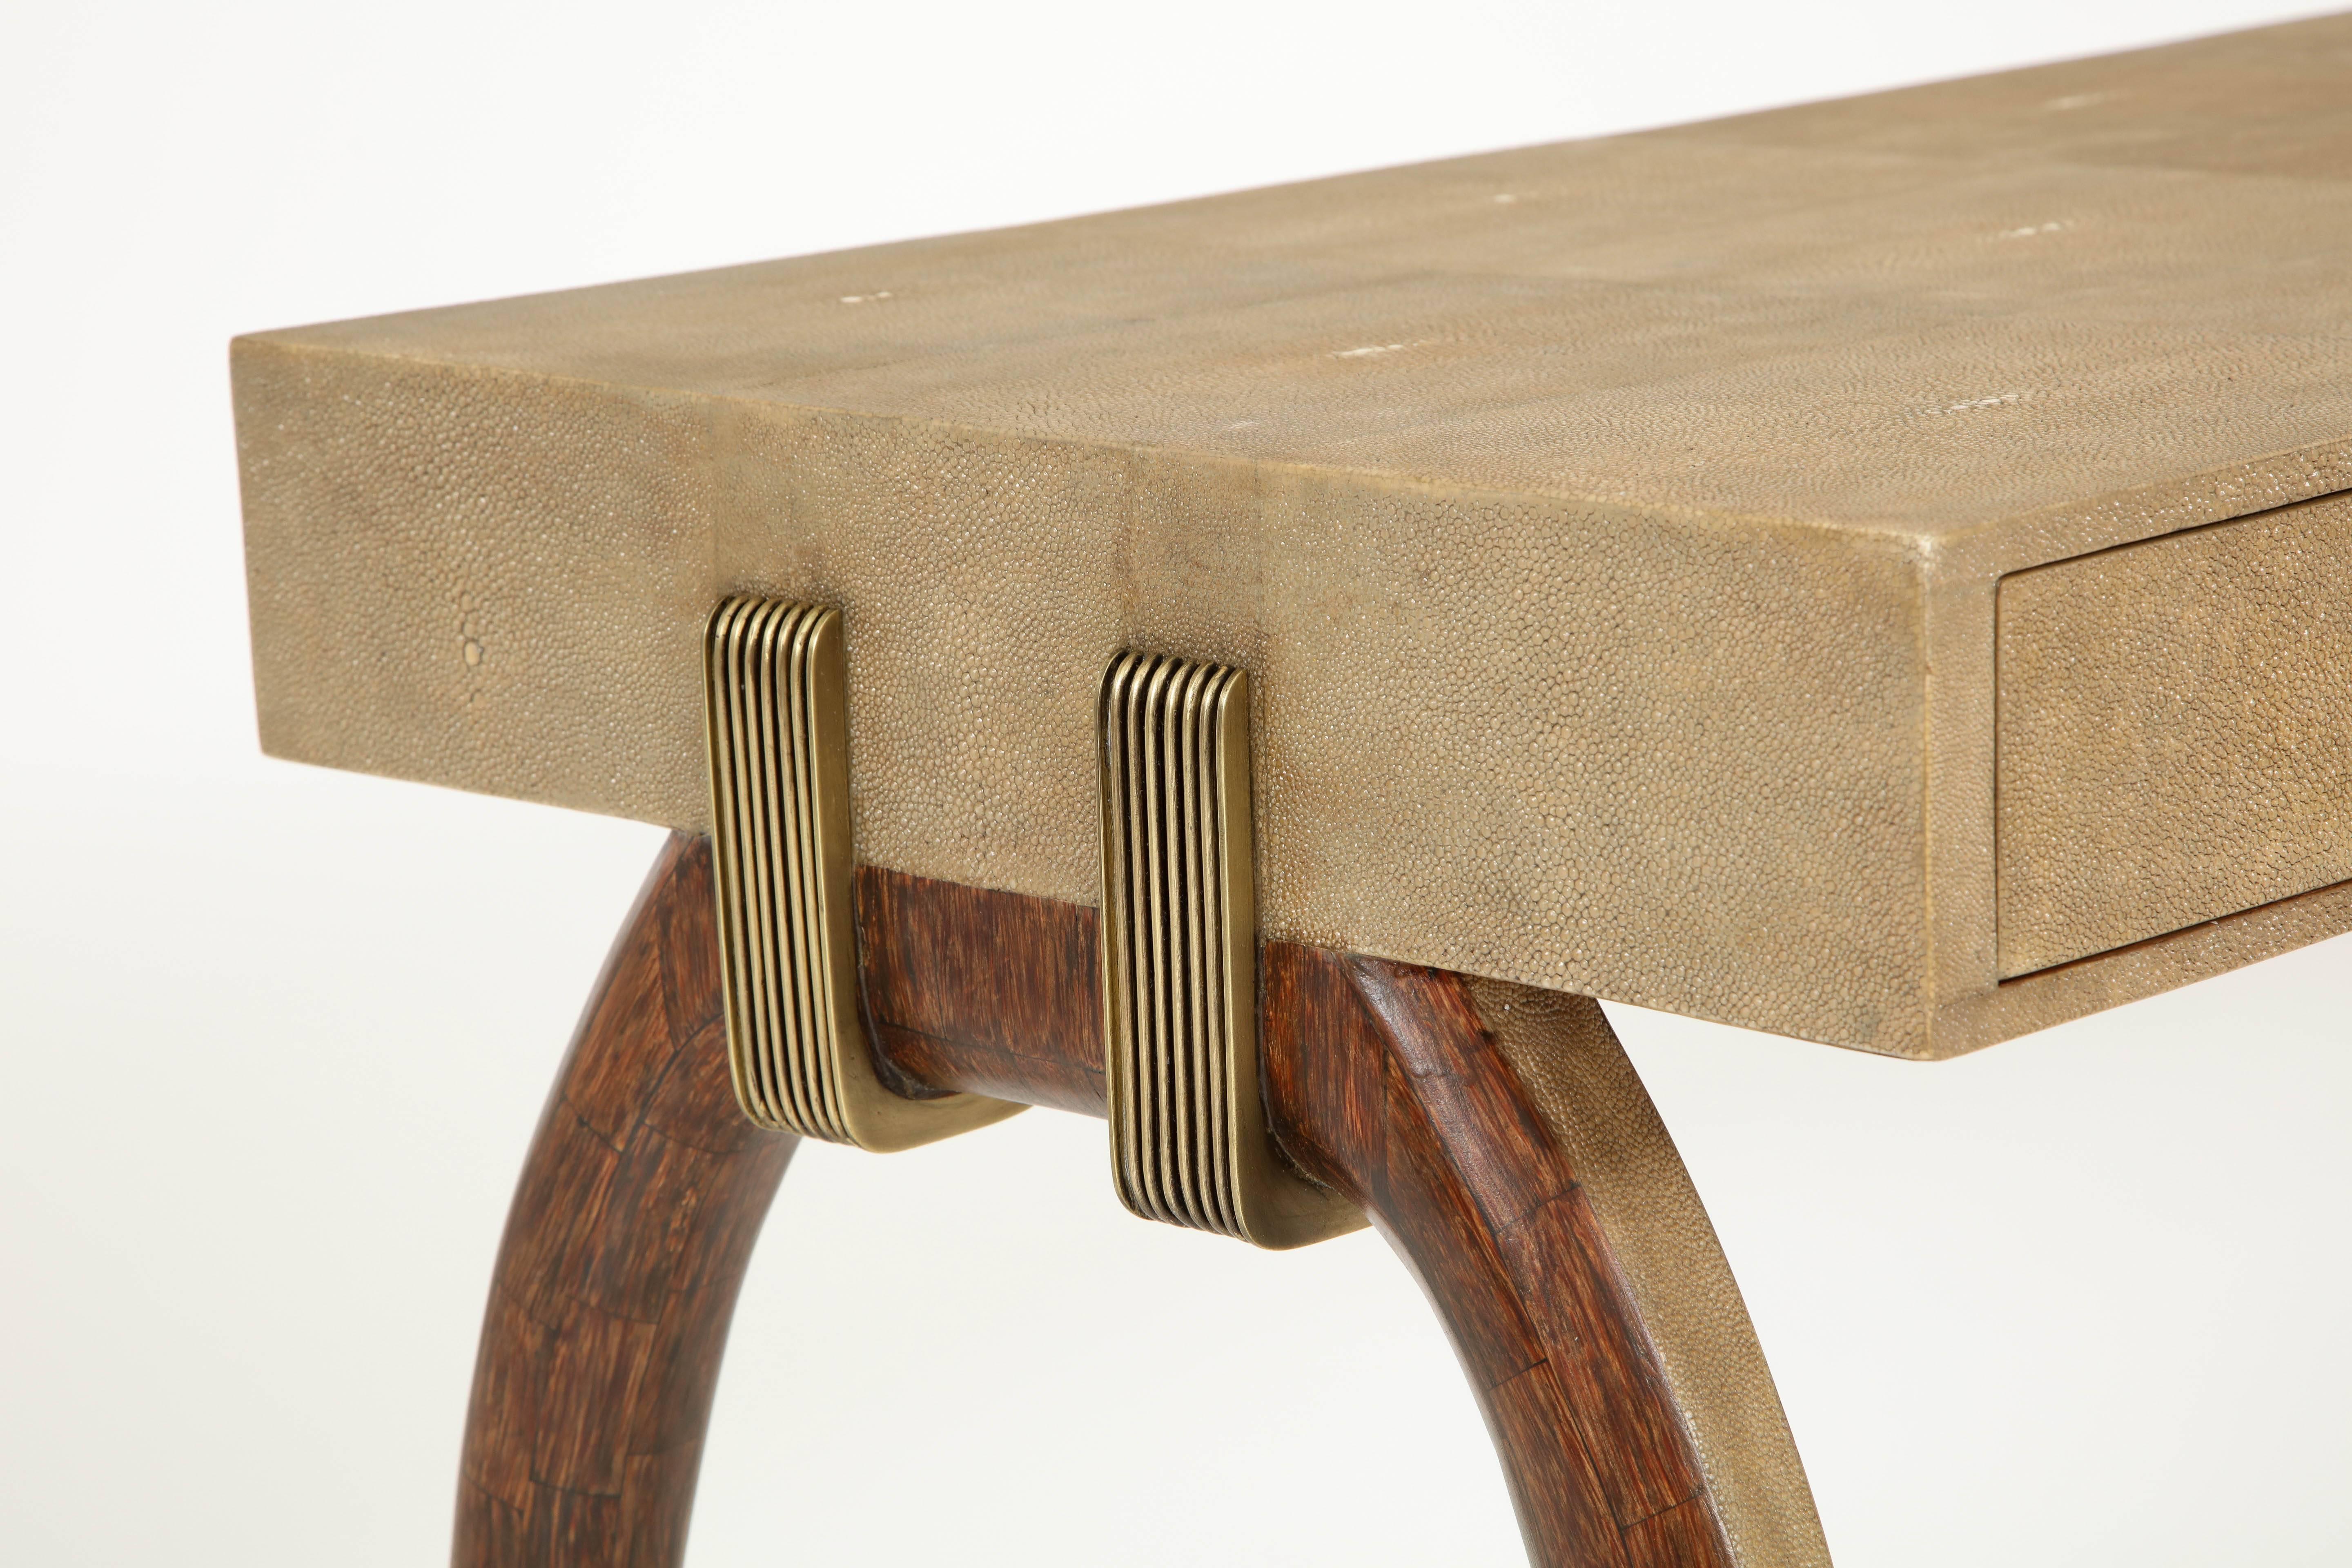 Art Deco Desk, Shagreen with Brass and Palm Wood Details, Contemporary, Khaki Color